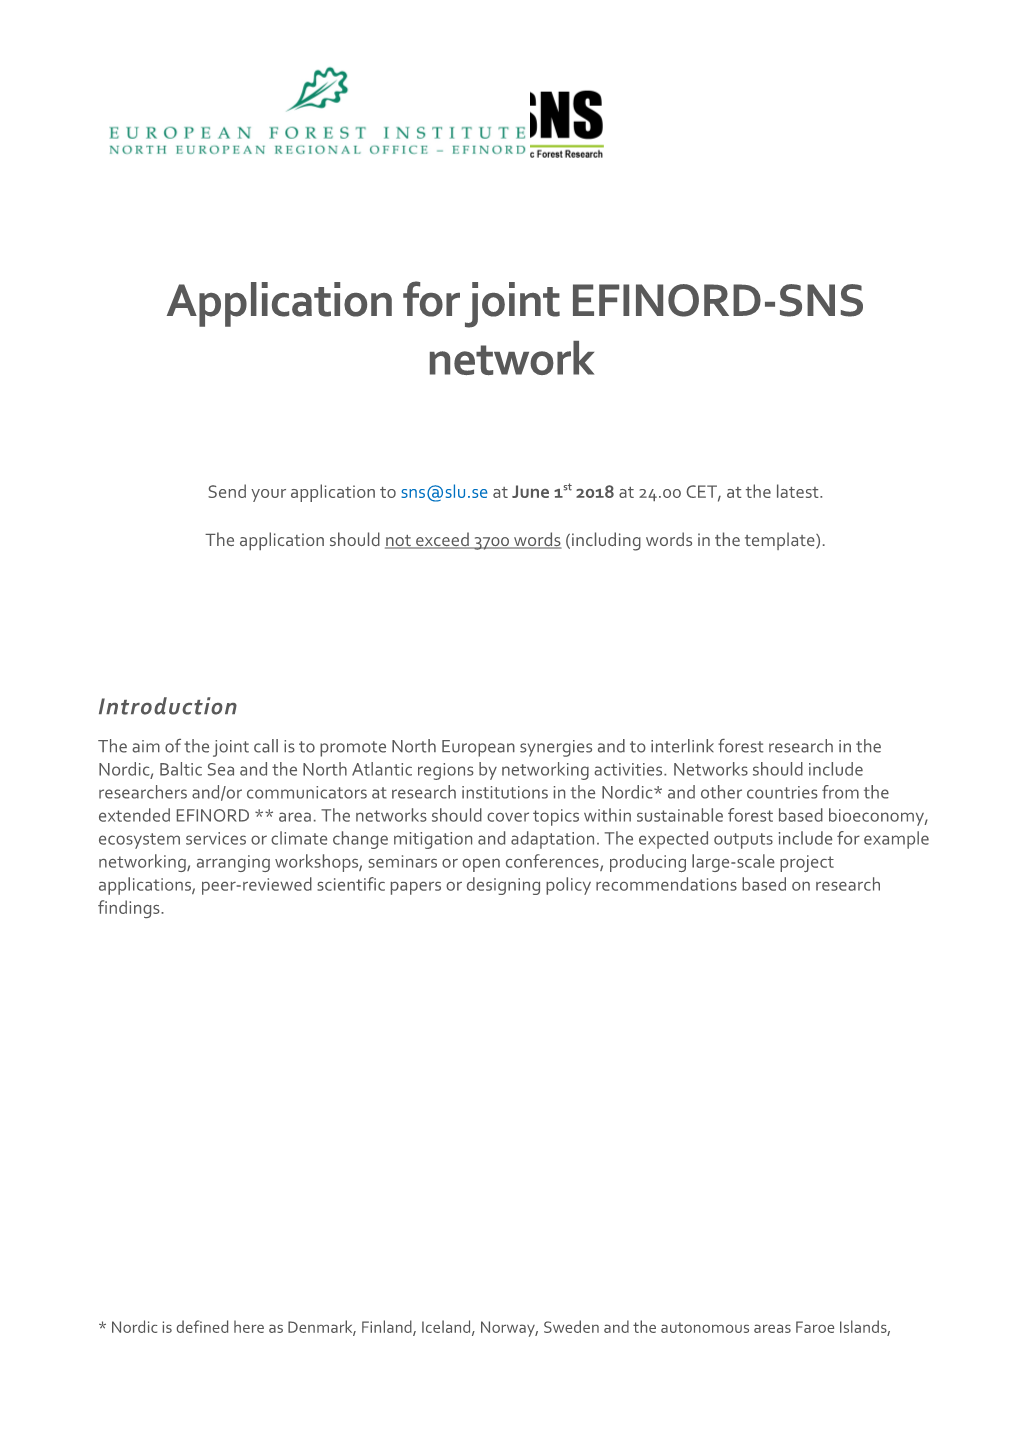 Application for Joint EFINORD-SNS Network Activities